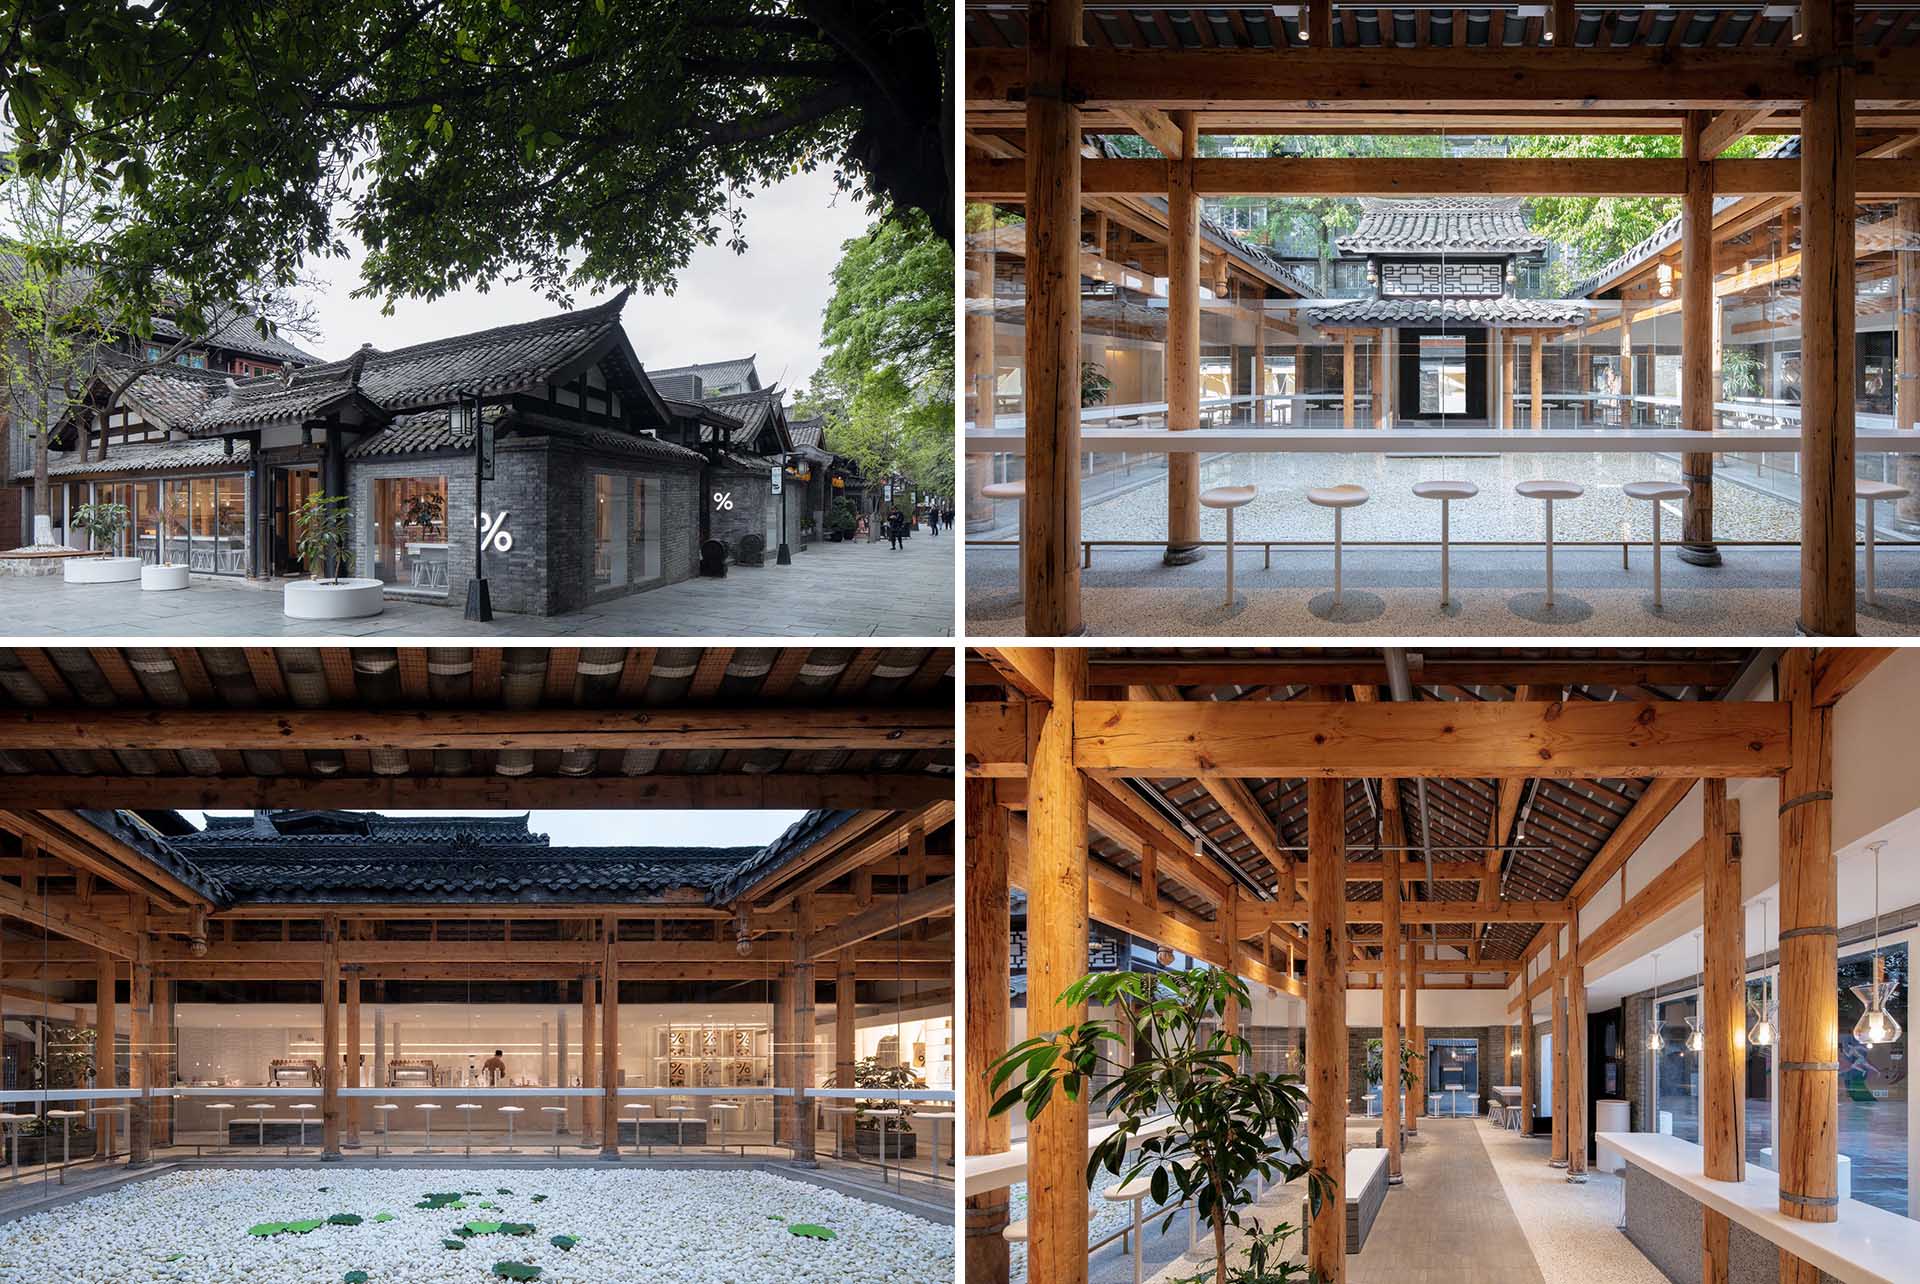 This modern coffee shop was built to respect the traditional western-Sichuan residential architecture that includes an interior courtyard.